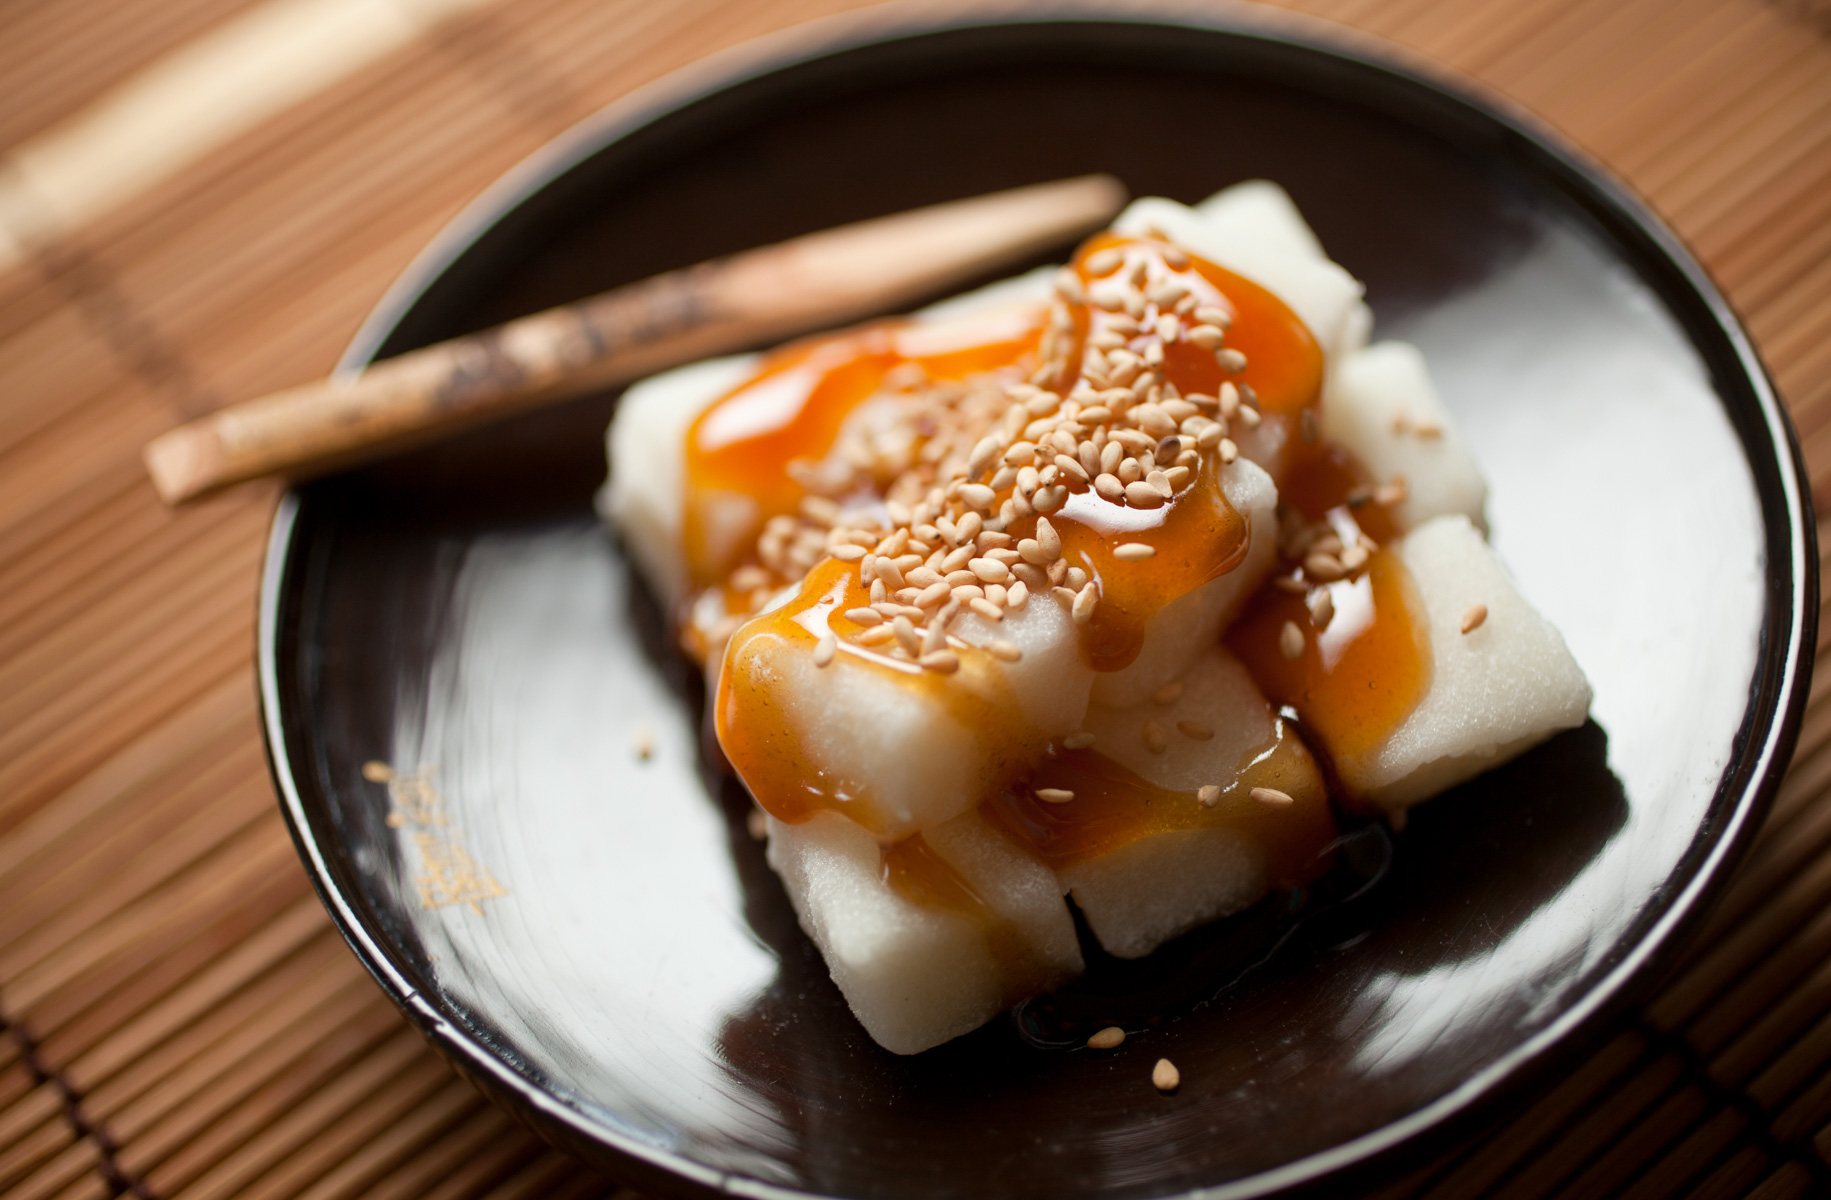 5/24/12 Somerville, MA -- A photo of Mitarashi, which is mochi  covered with a sweet soy sauce glaze and sesame seeds May 24, 2012.  Erik Jacobs for the Boston Globe